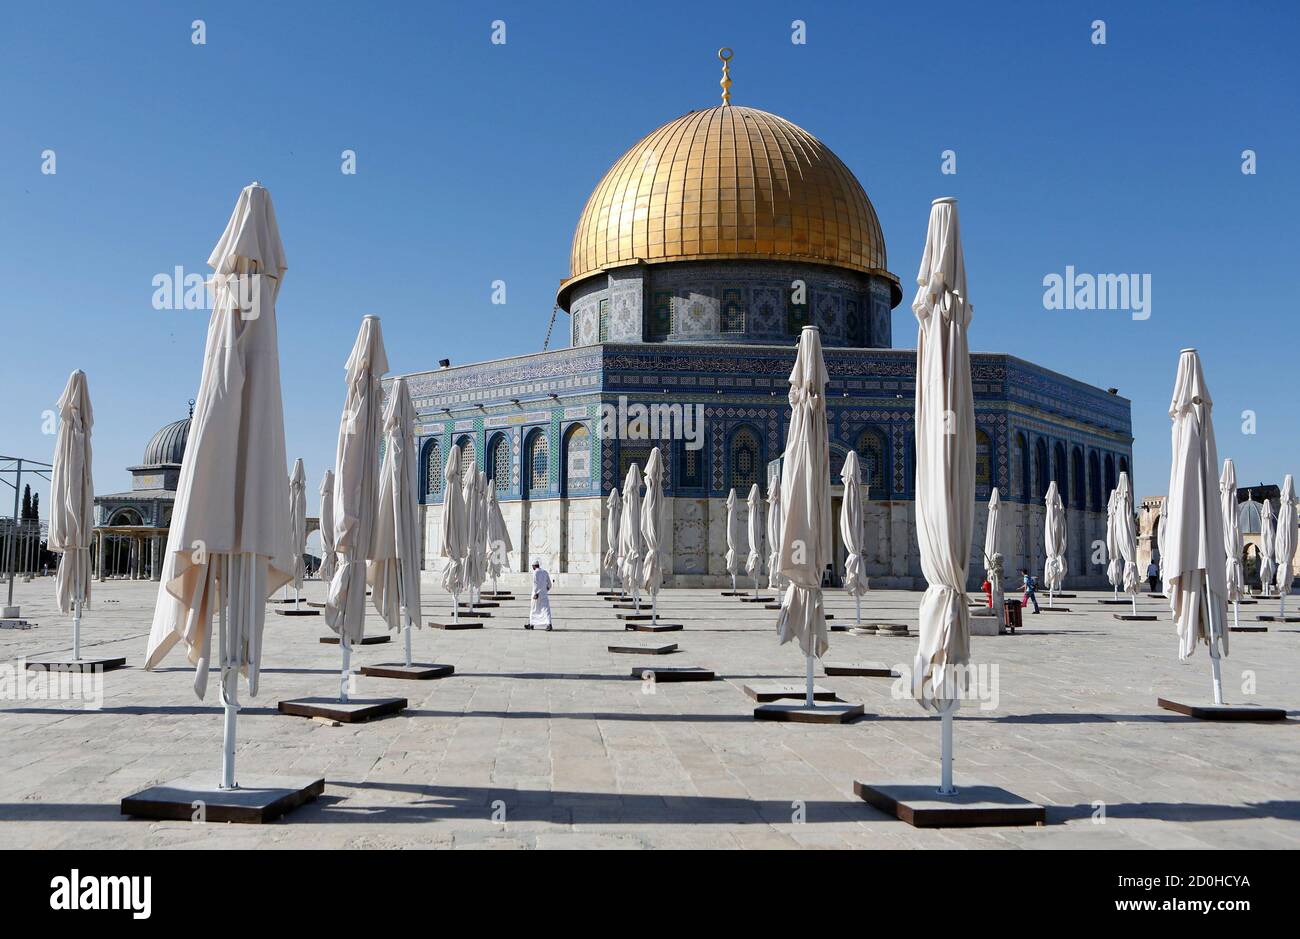 Palestinians walk amongst parasols placed outside the Dome of the Rock on the compound know to Muslims as 'al-Haram al-Sharif' and to Jews as 'Temple Mount' in Jerusalem's Old City June 27, 2013. REUTERS/Baz Ratner (JERUSALEM - Tags: RELIGION SOCIETY TRAVEL) Stock Photo